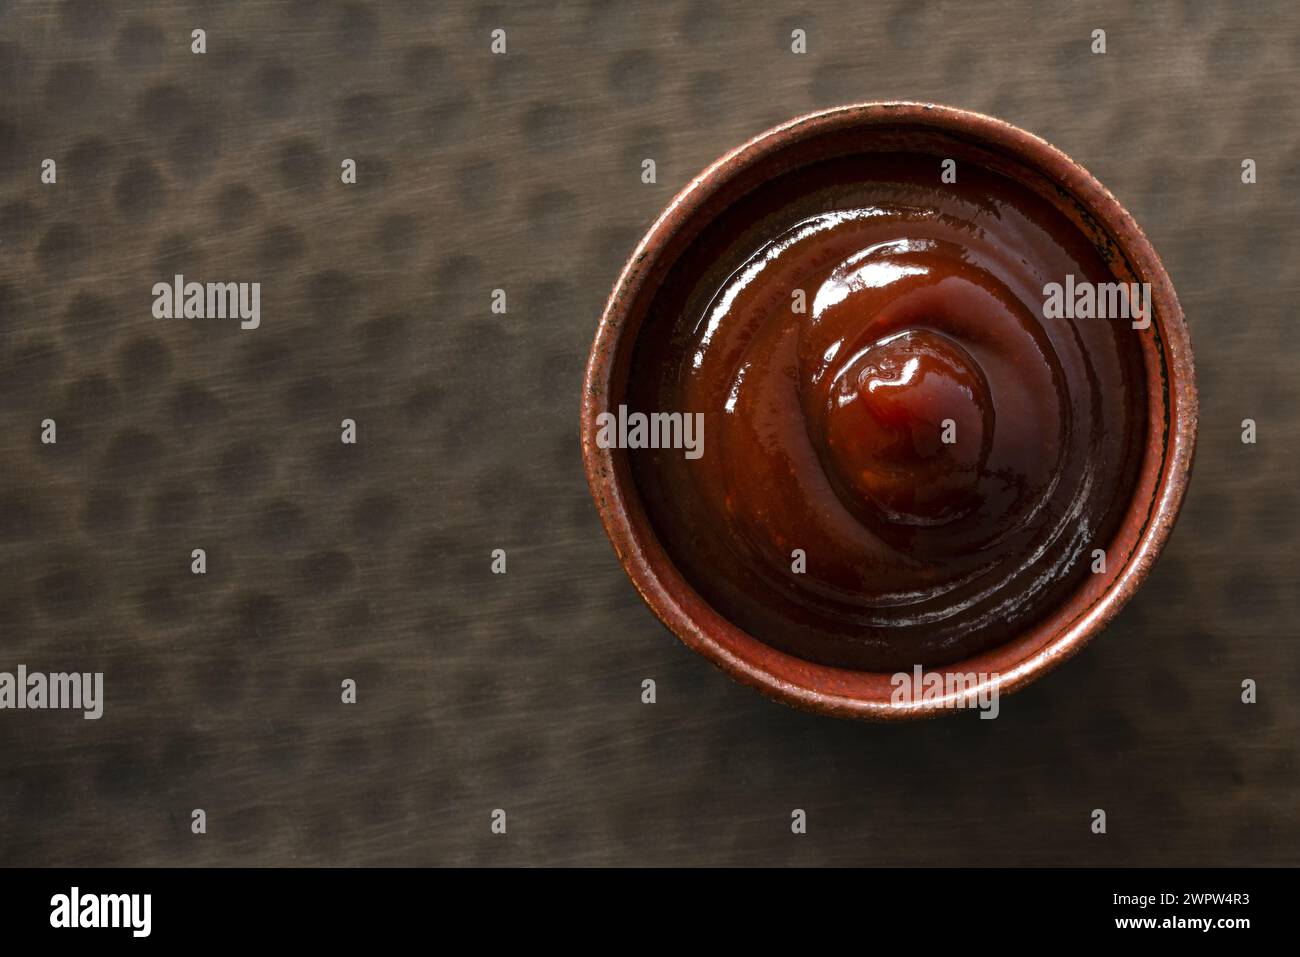 BBQ Sauce in a Bowl Stock Photo